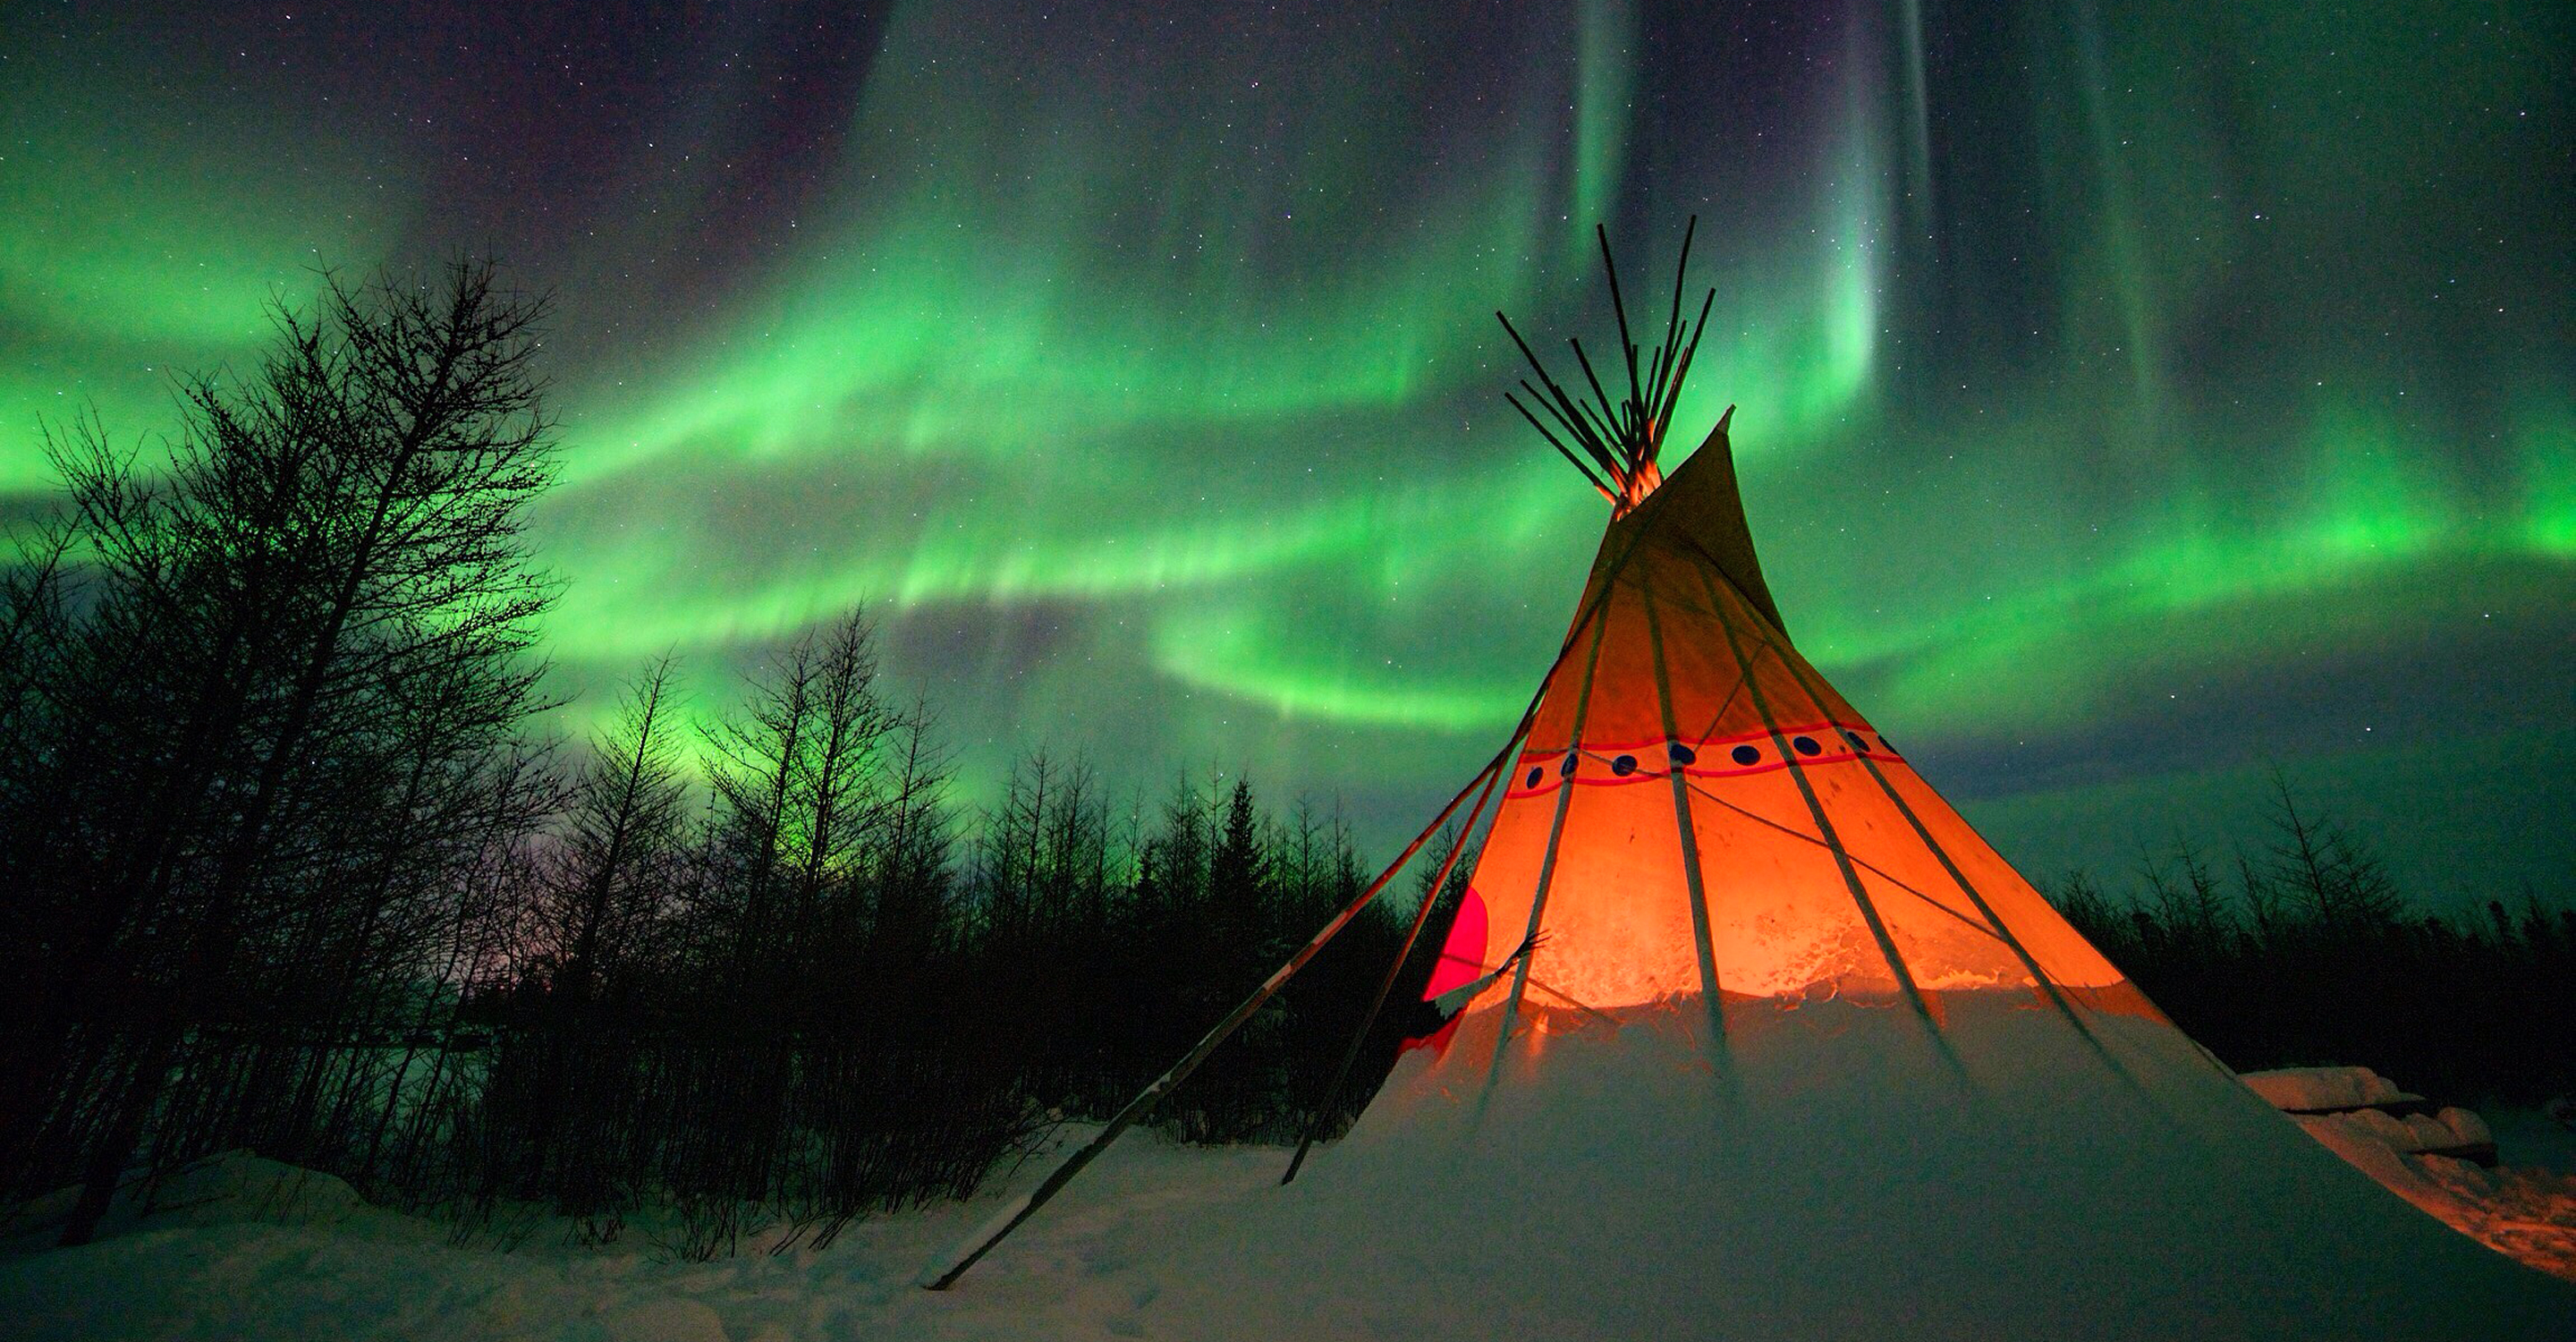 A teepee in the snow under the northern lights in Churchill, Manitoba, Canada;